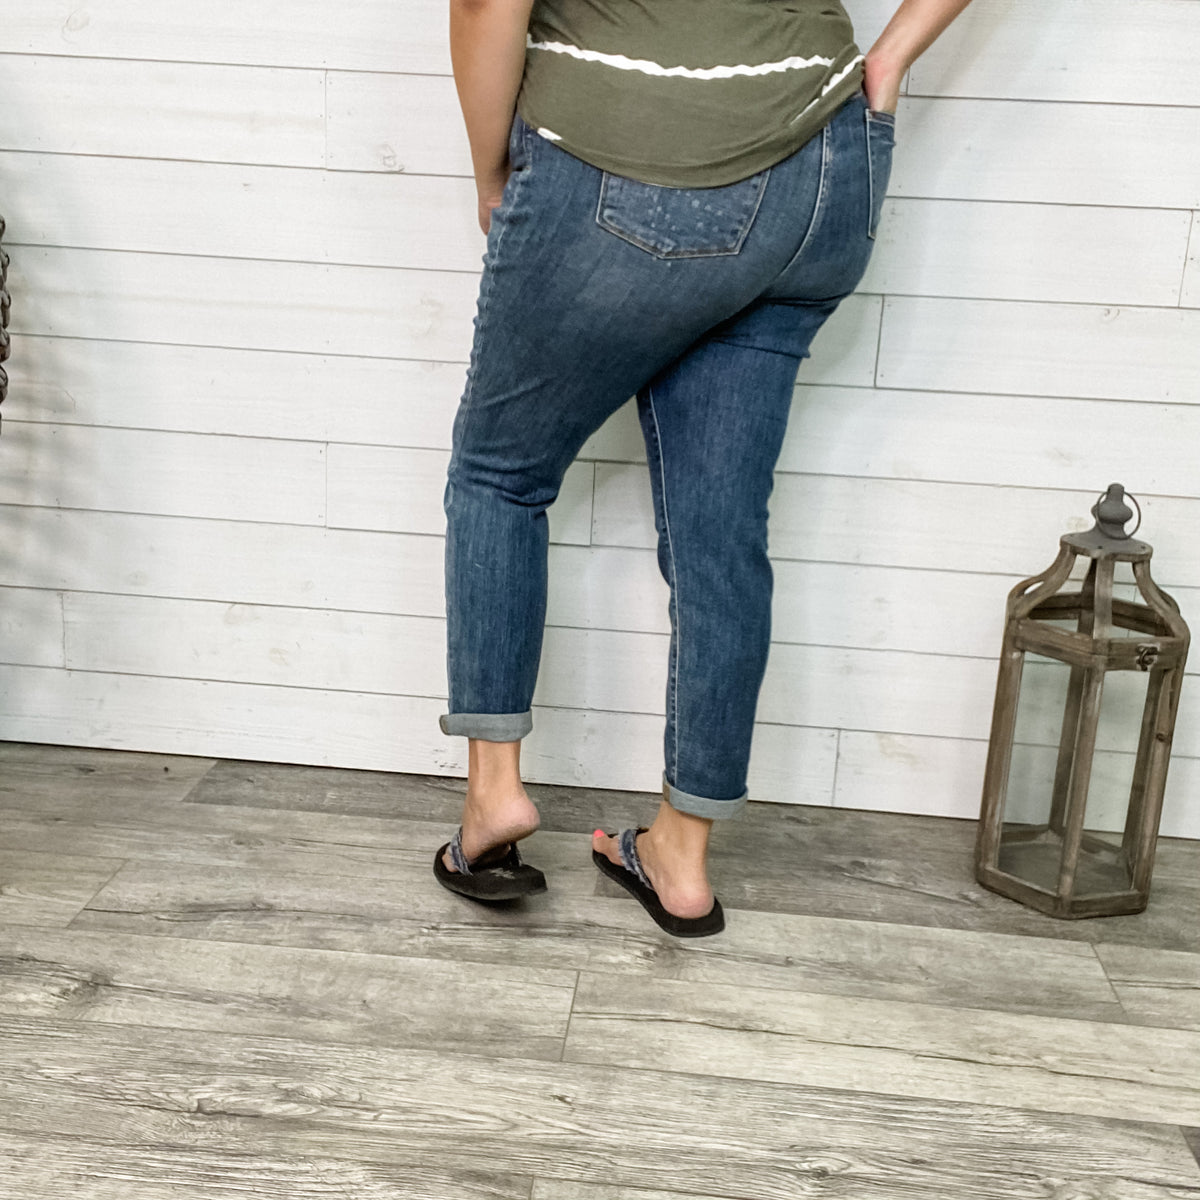 Thermal Judy Blues – the Savvy Jean